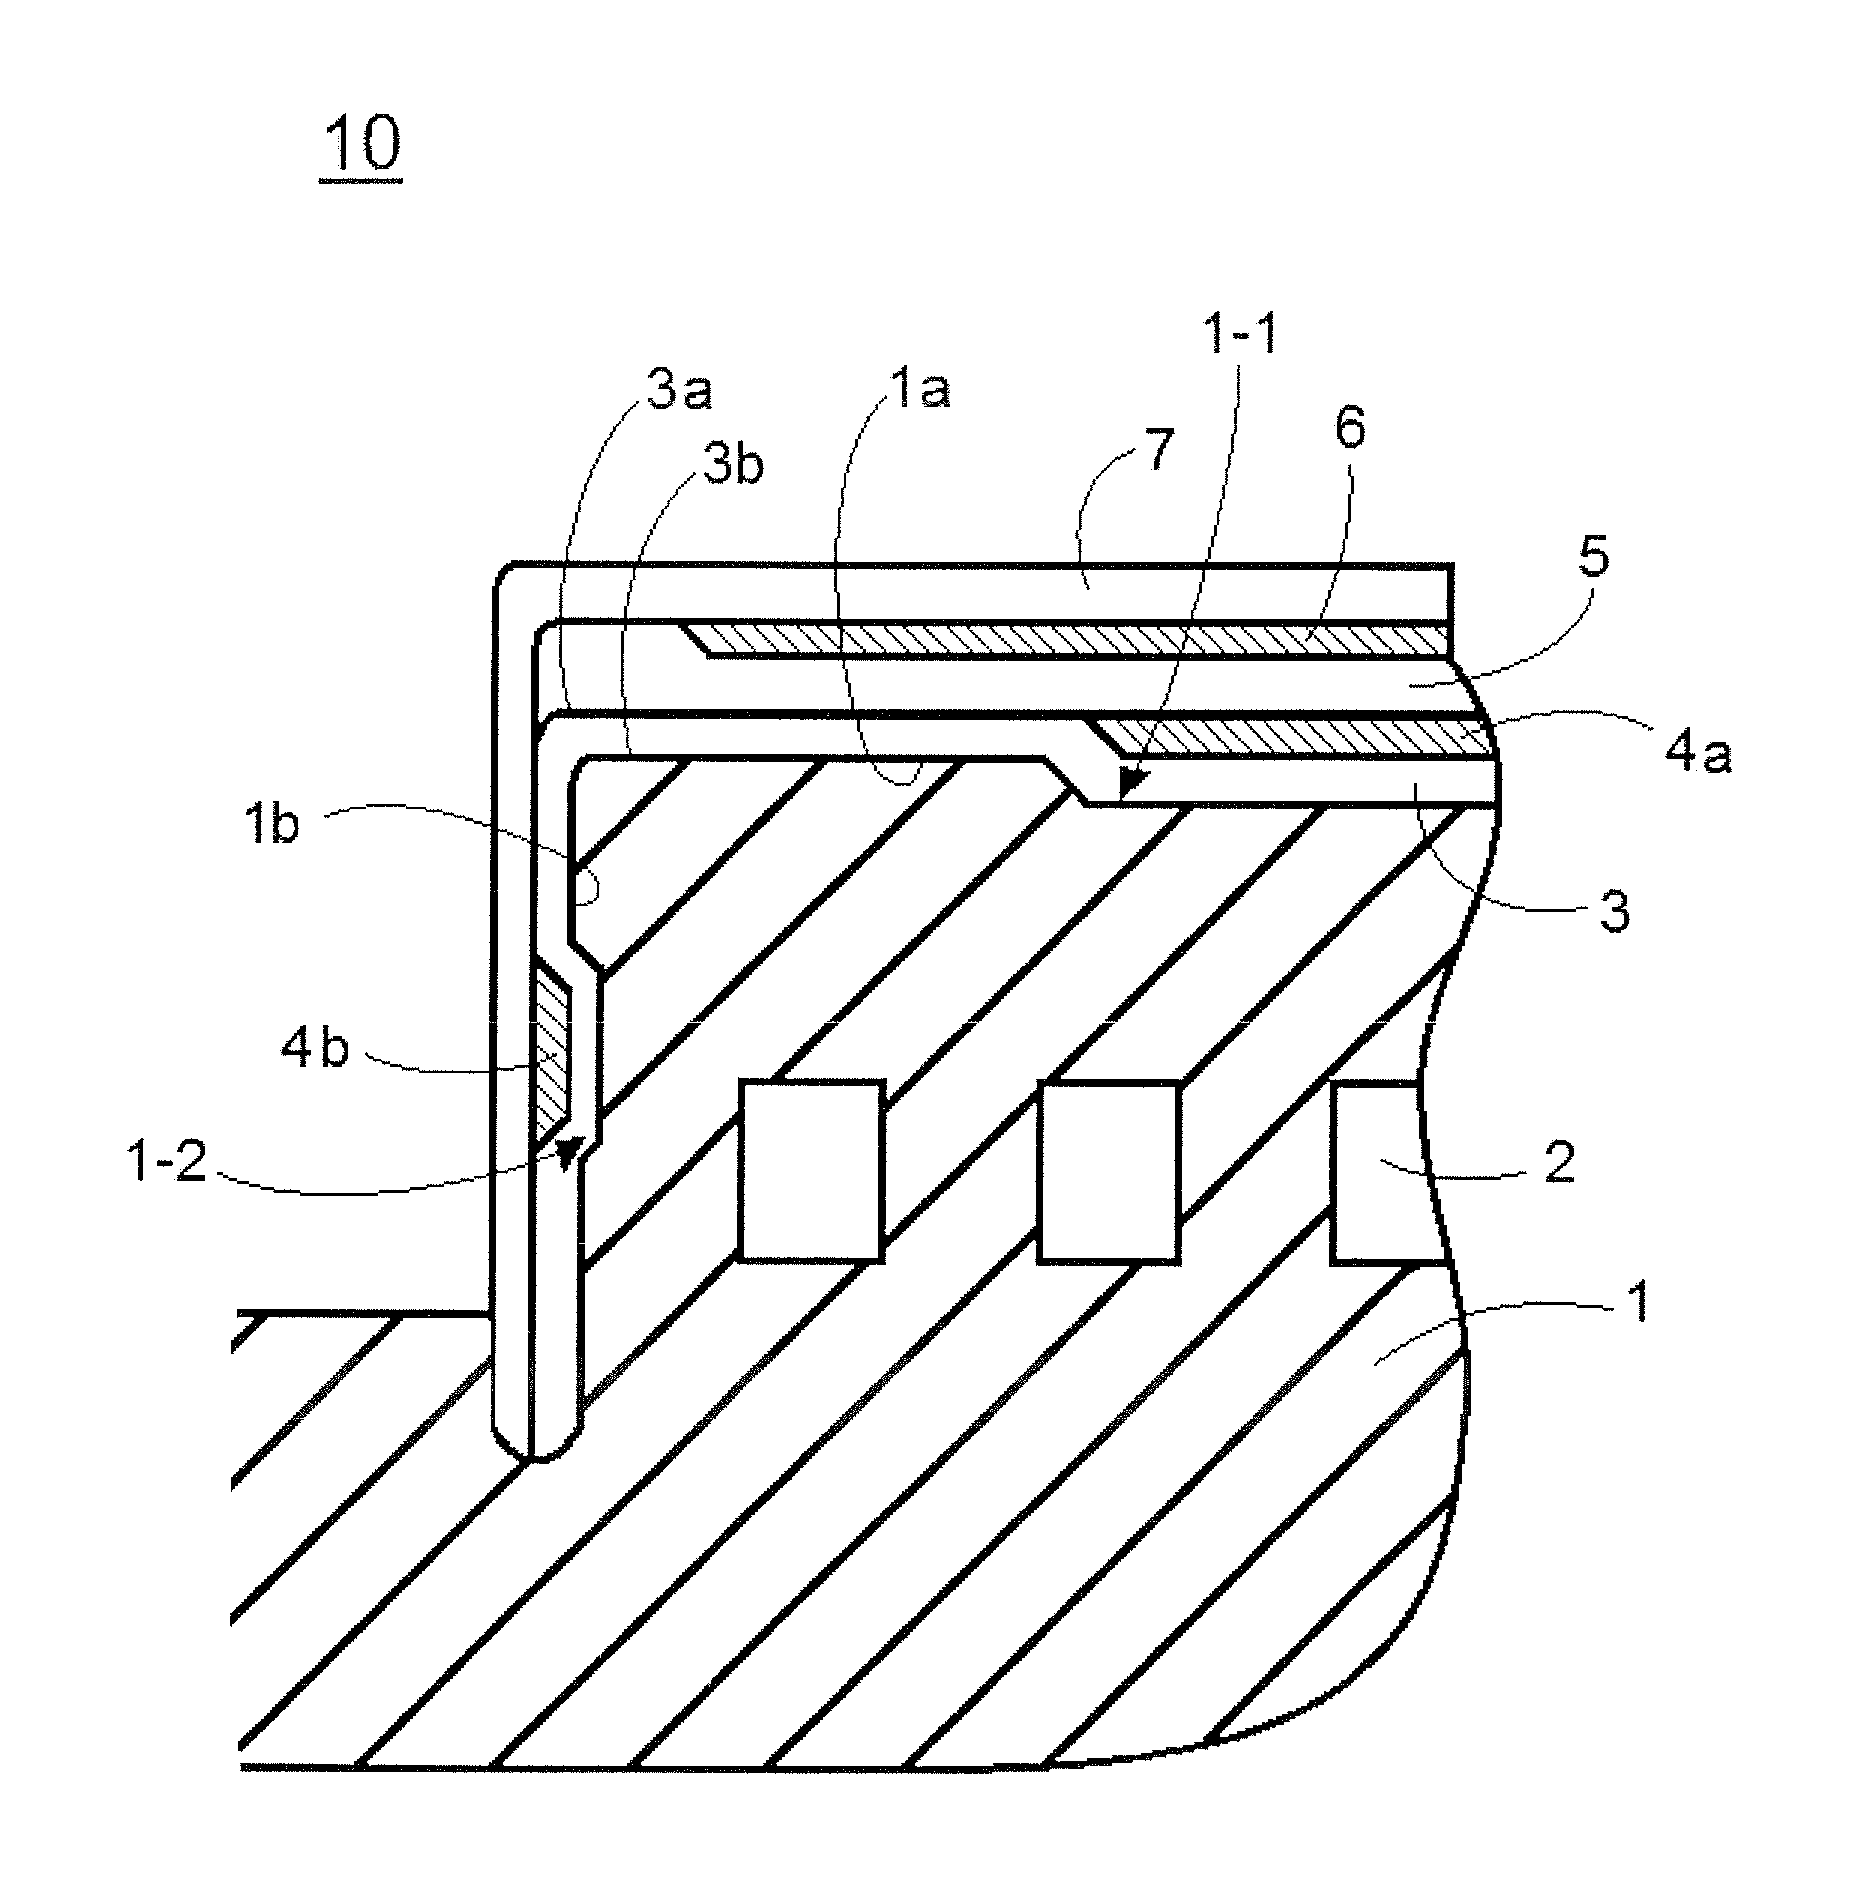 Heated electrostatic chuck and semiconductor wafer heater and methods for manufacturing same